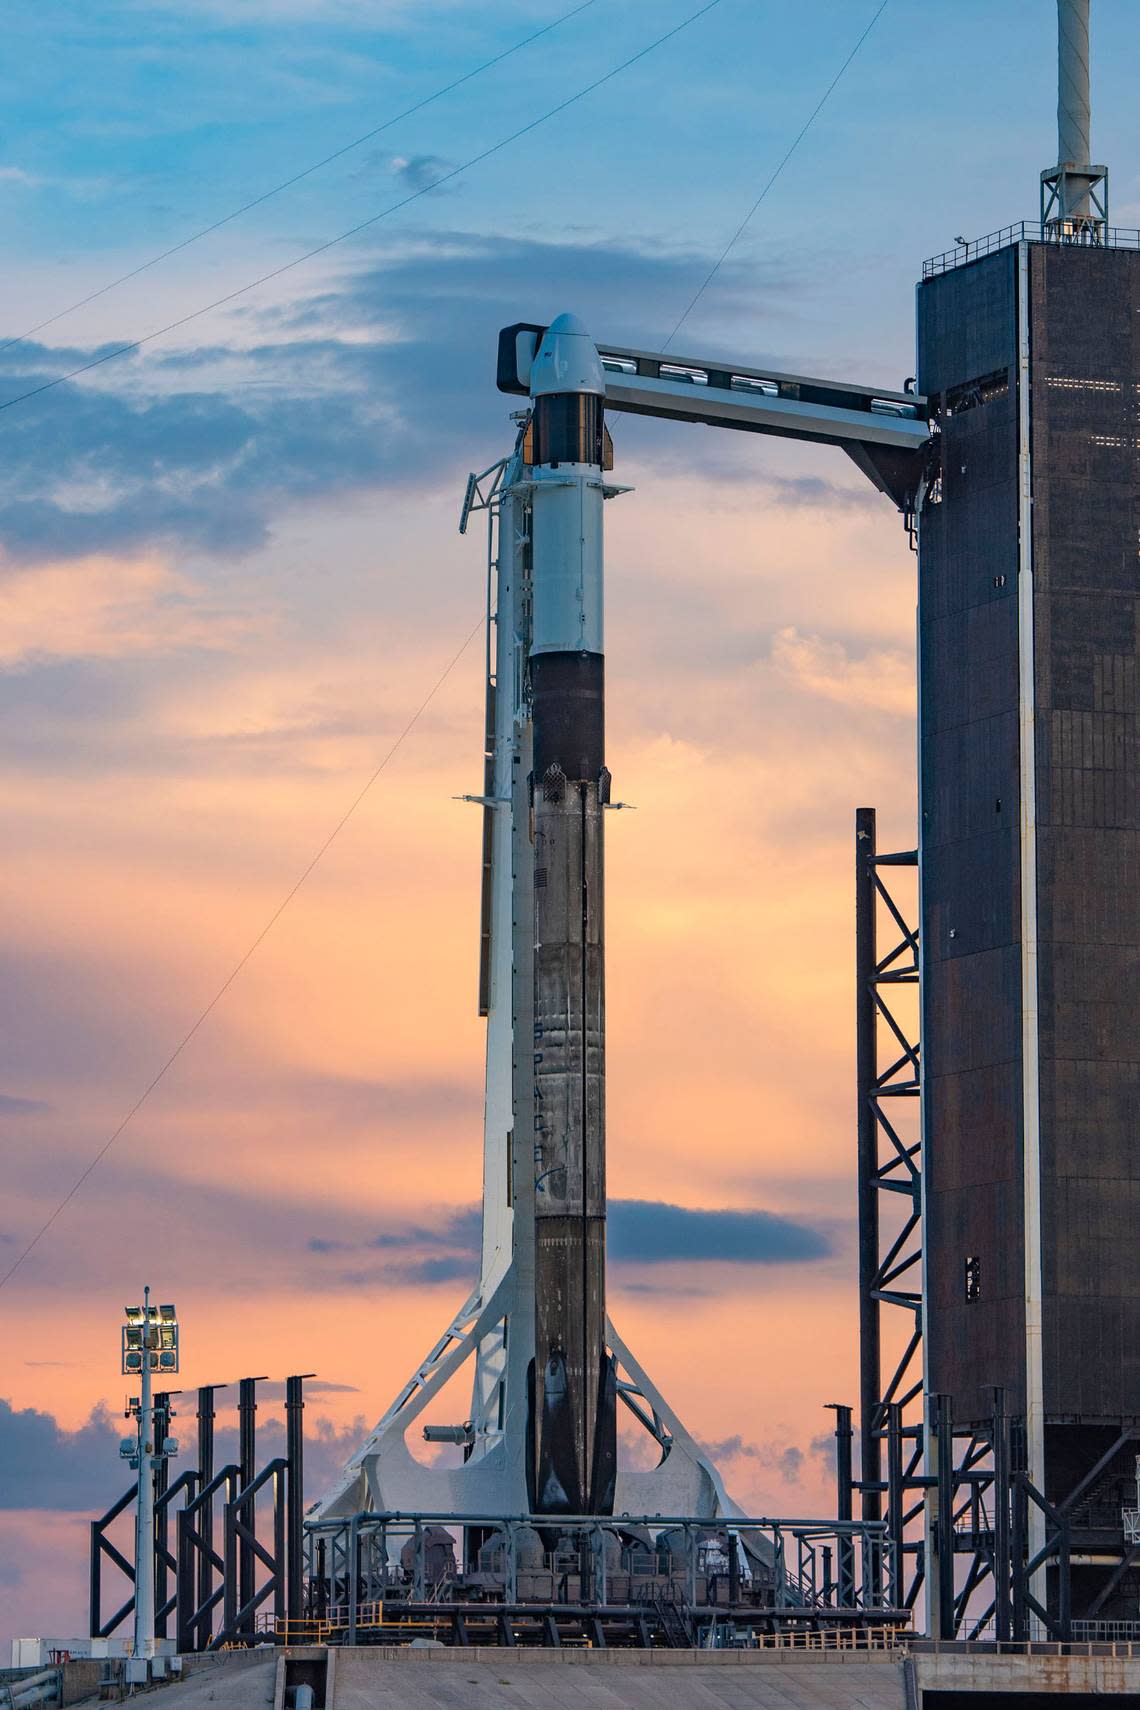 A SpaceX Falcon 9 rocket at the NASA Kennewick Space Center was prepared to launch on July 14 with research projects aboard.